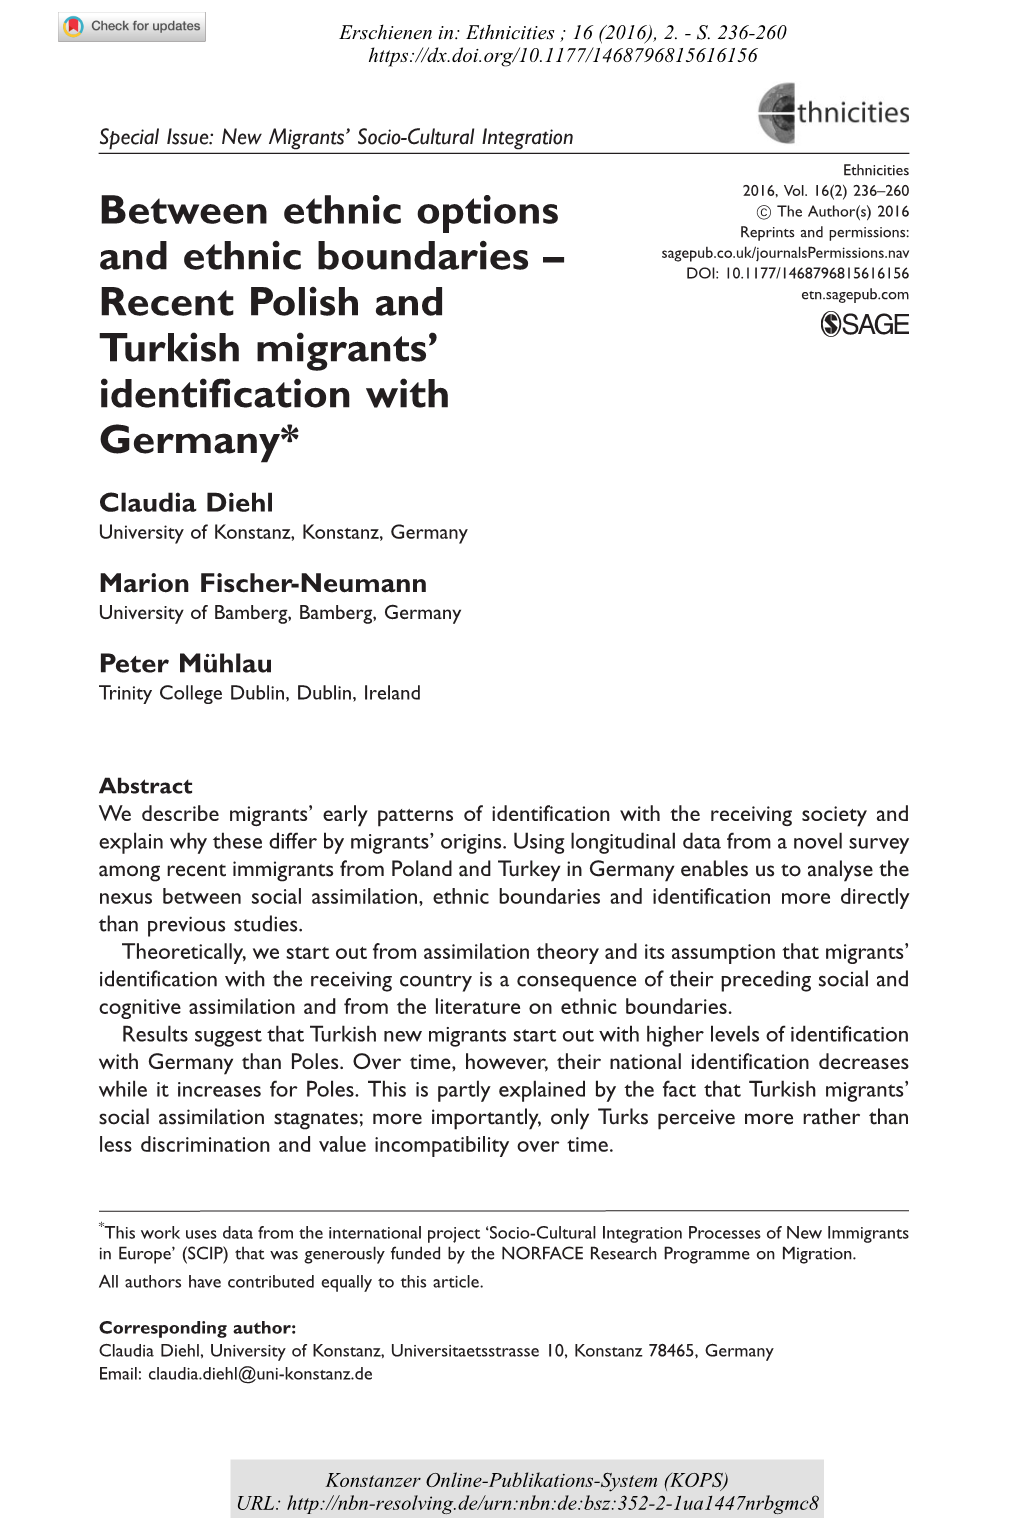 Between Ethnic Options and Ethnic Boundaries : Recent Polish and Turkish Migrants' Identification with Germany